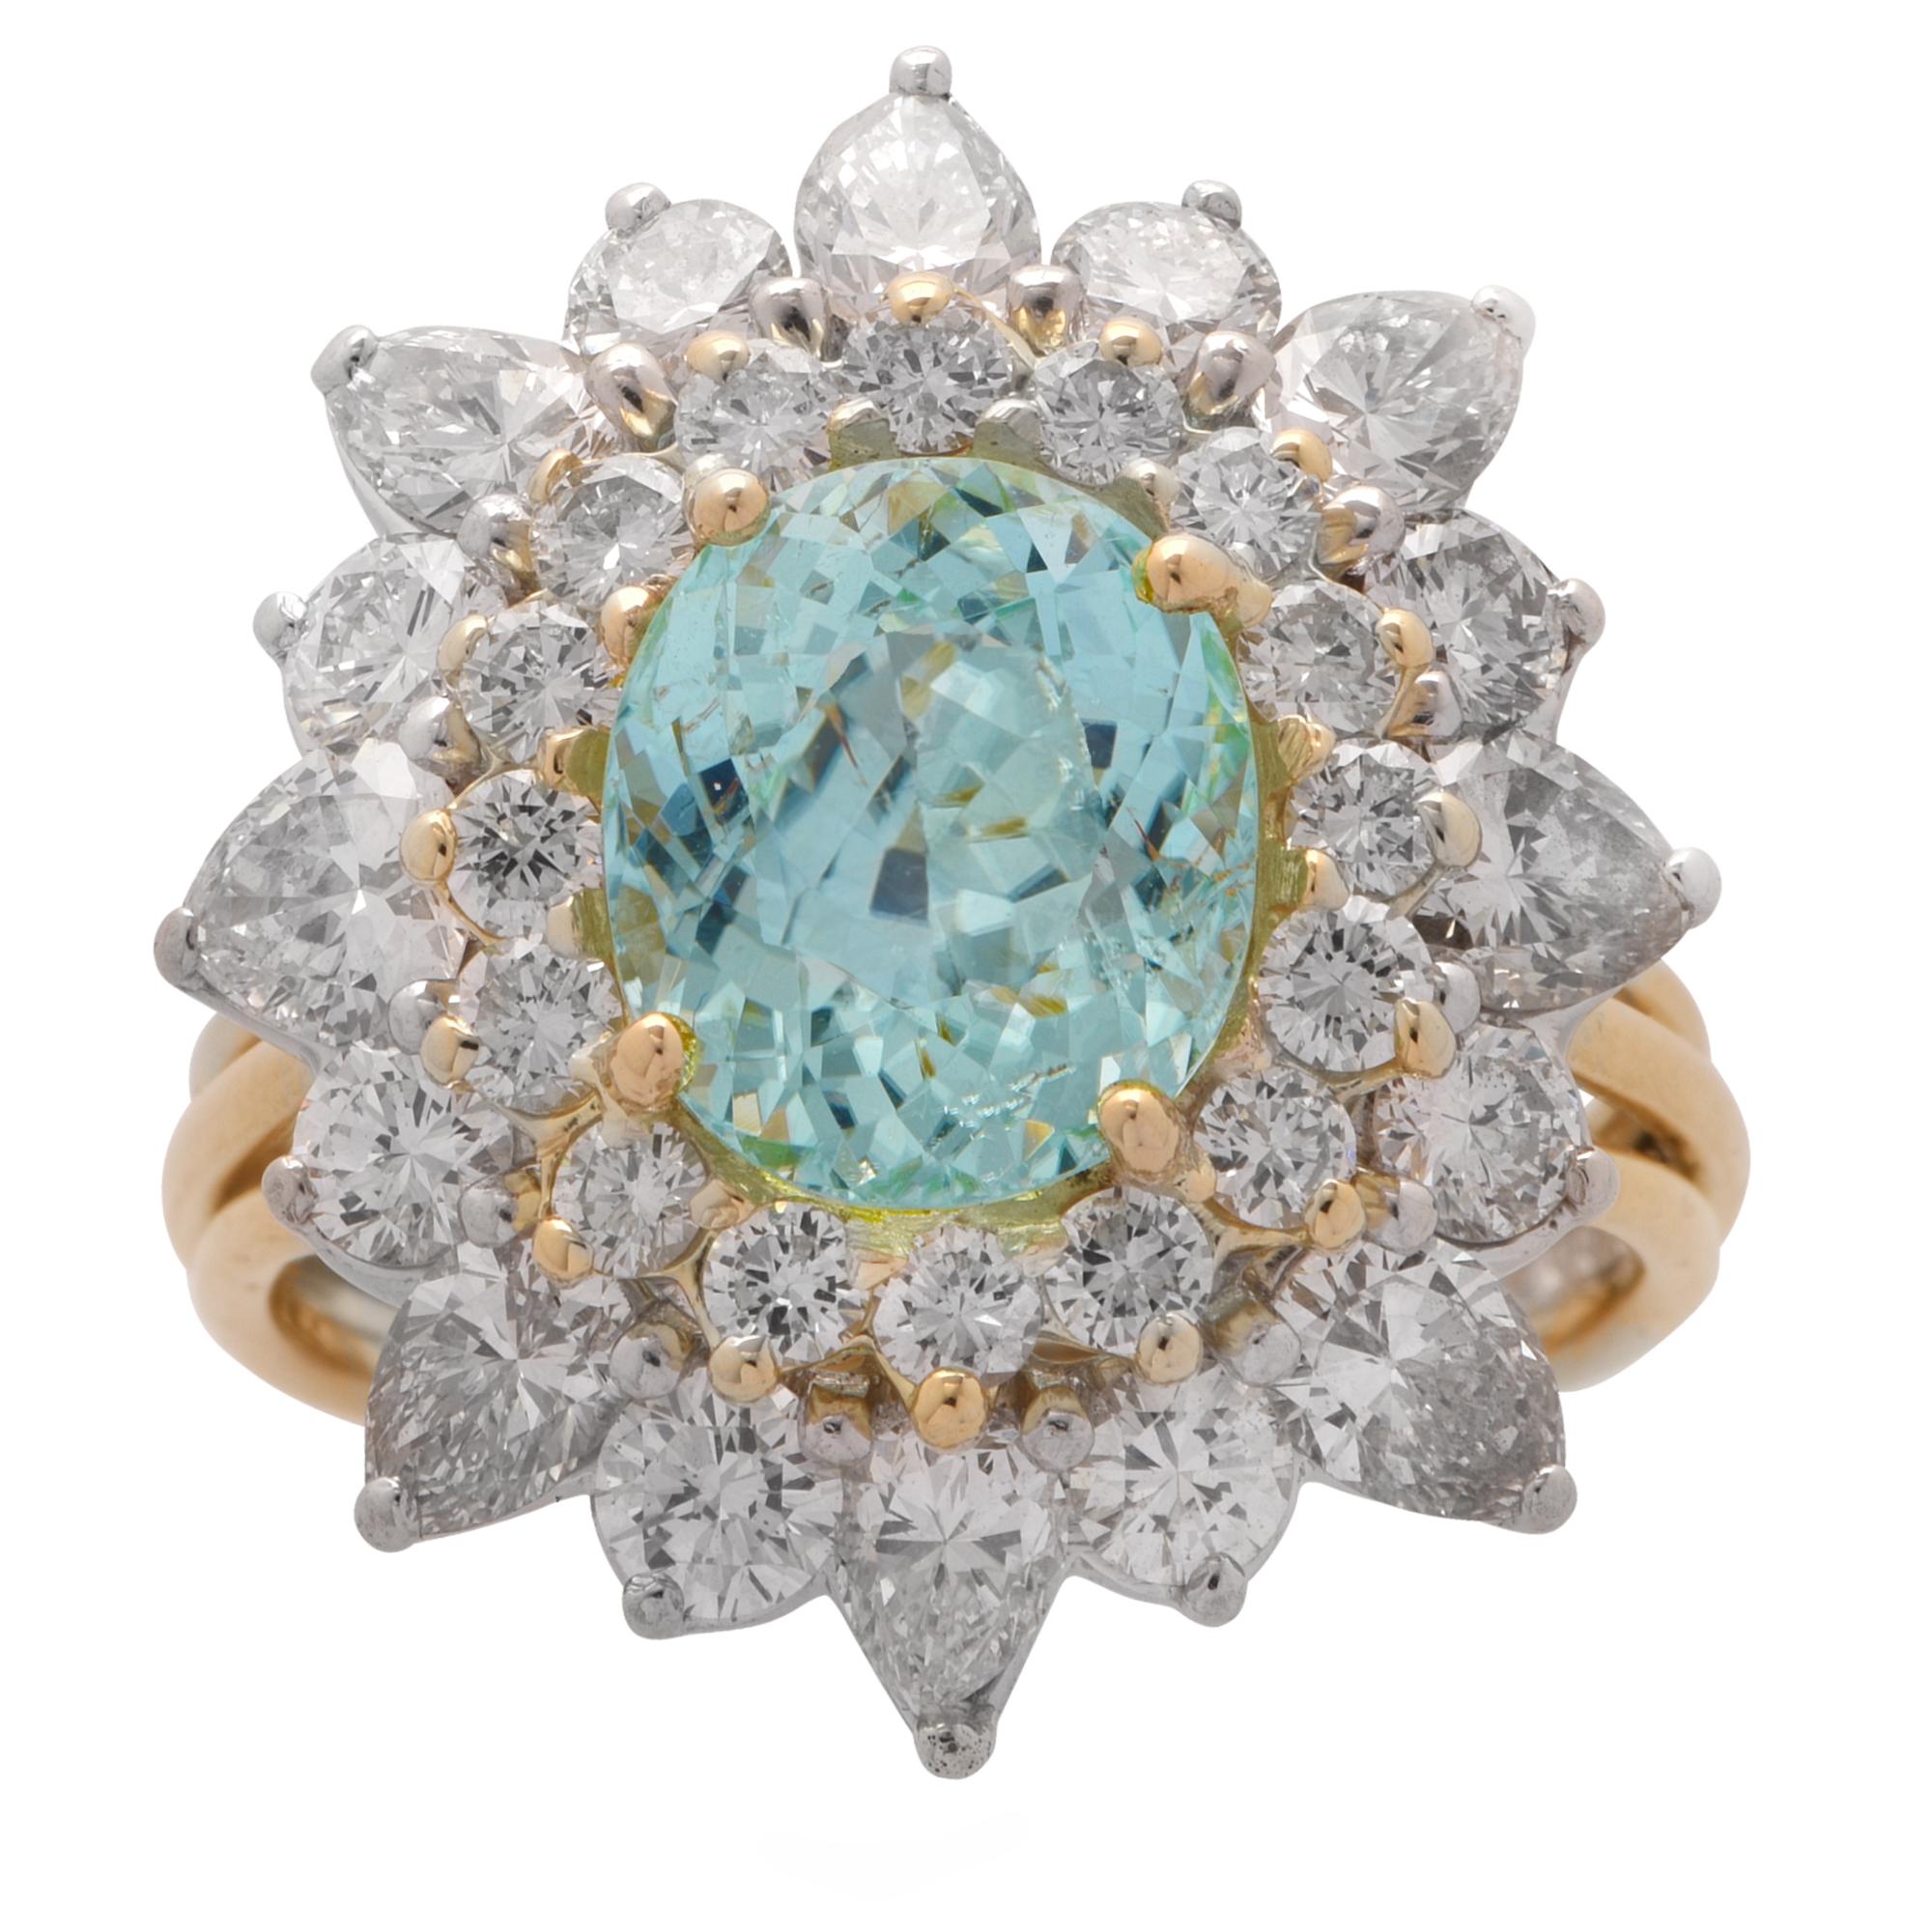 Elegant ballerina ring crafted in 18 karat white and yellow gold, featuring a GIA certified rich greenish-blue oval cut Tourmaline weighing 2.72 carats, surrounded by 32 round brilliant cut and pear shape diamonds, weighing approximately 3 carats,